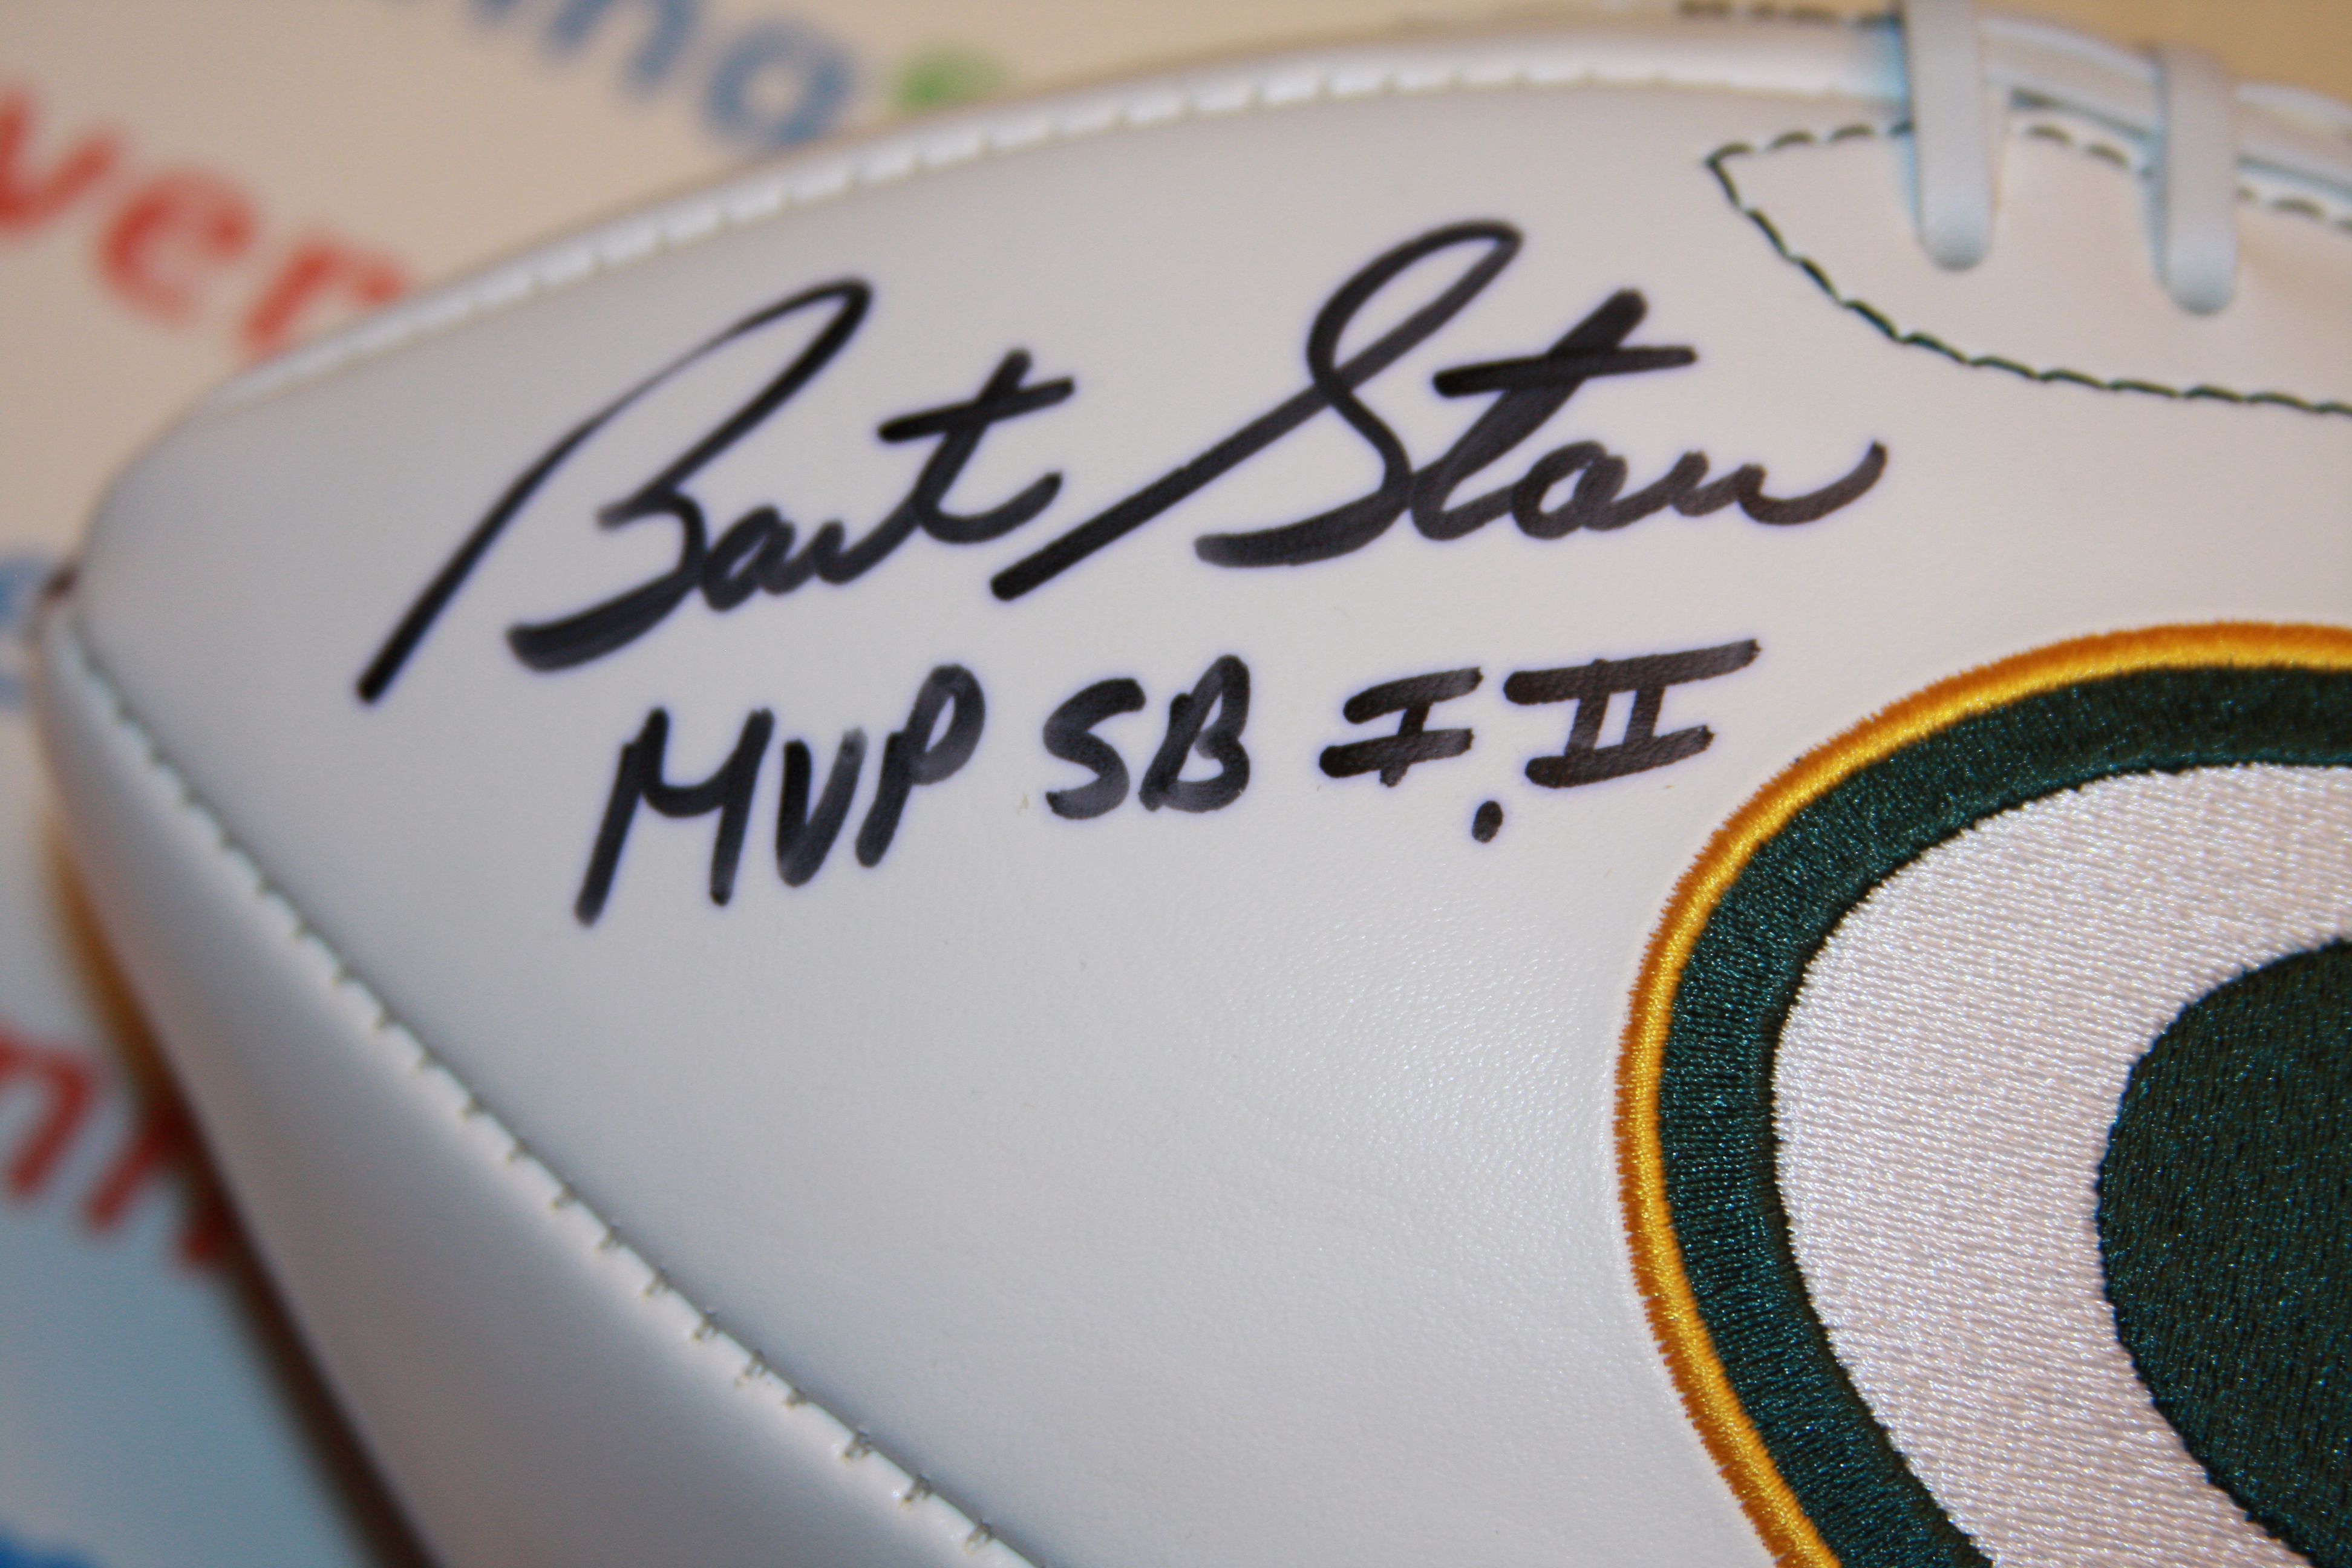 Bart Starr Autographed Green Bay Packers Logo Football Super Bowl 